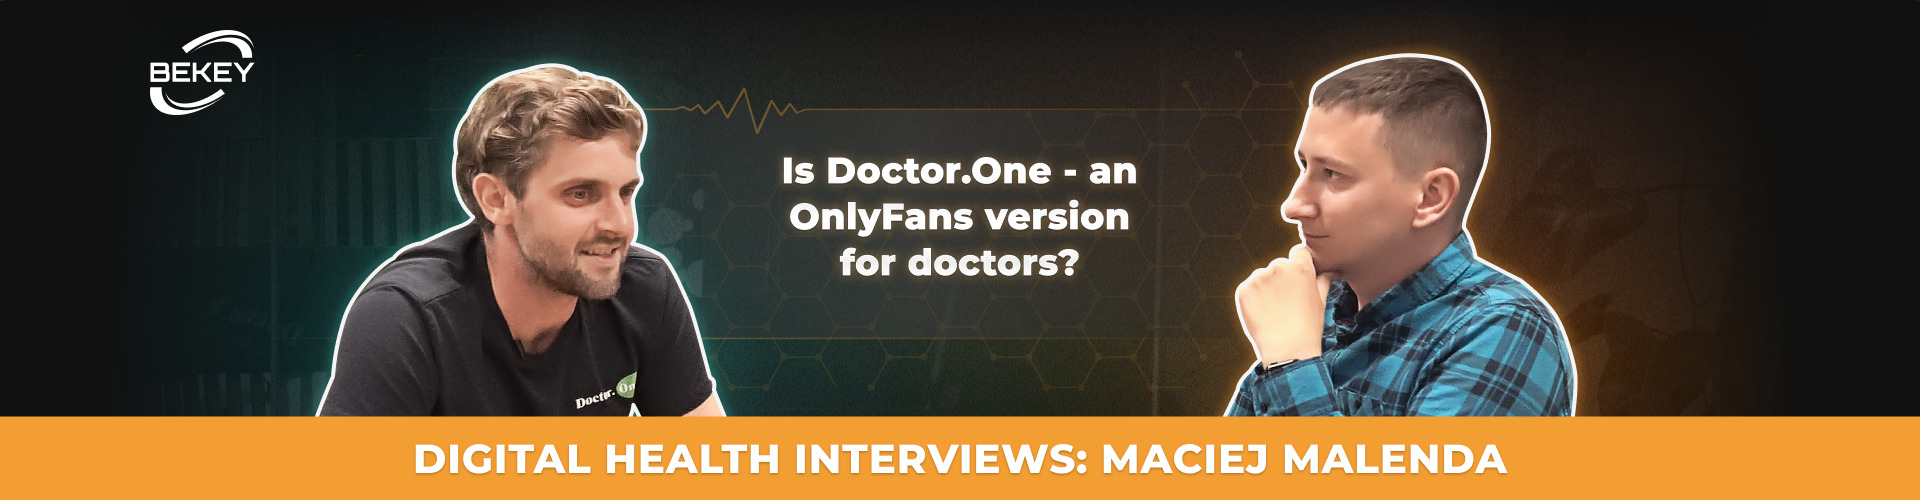 Digital Health Interviews: Maciej Malenda. Is Doctor.One — an OnlyFans version for doctors? - image